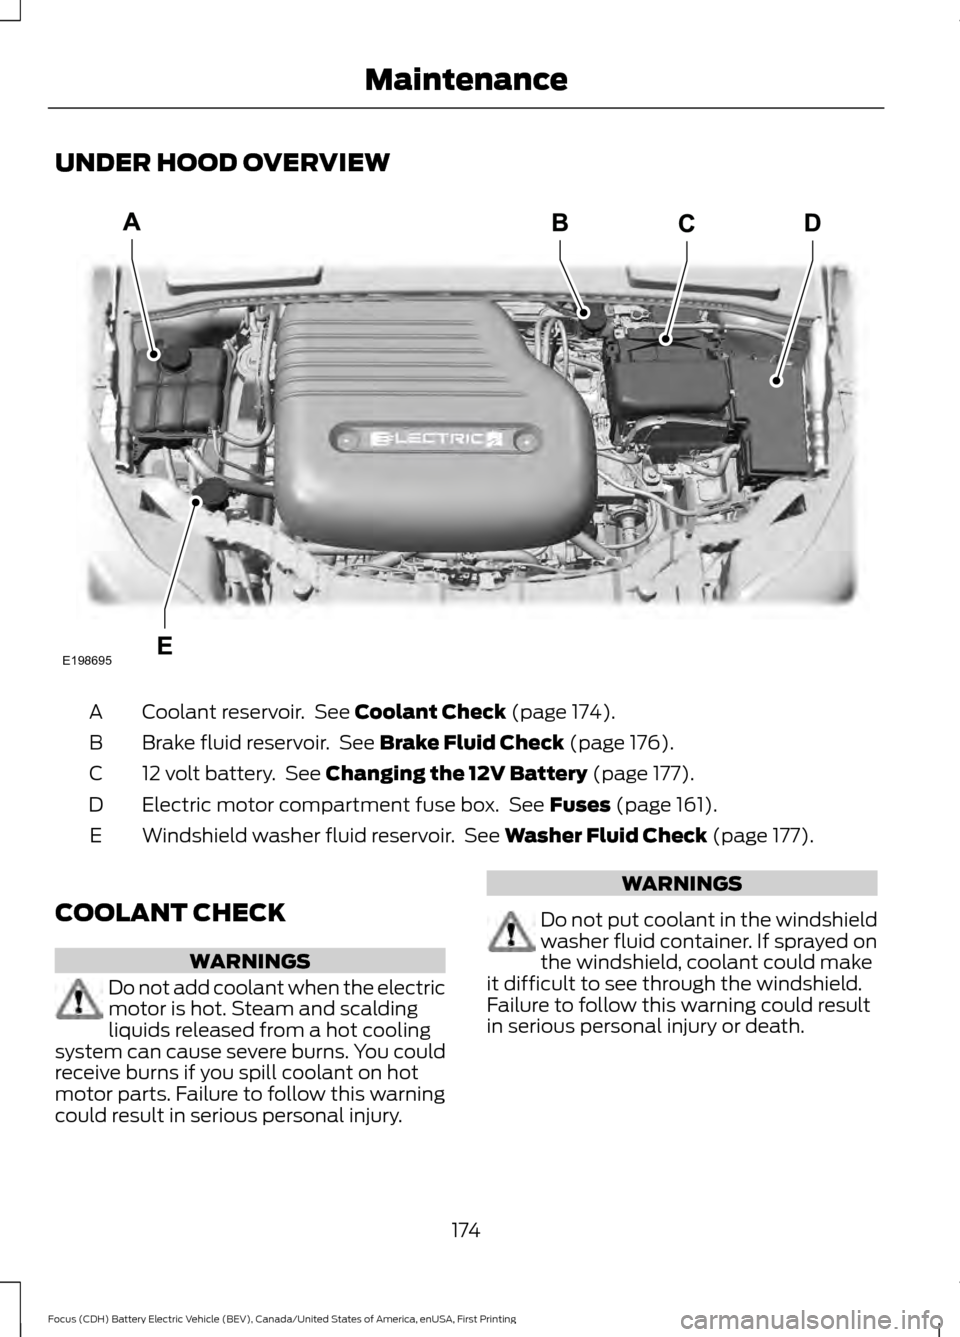 FORD FOCUS ELECTRIC 2016 3.G Owners Manual UNDER HOOD OVERVIEW
Coolant reservoir.  See Coolant Check (page 174).
A
Brake fluid reservoir.  See 
Brake Fluid Check (page 176).
B
12 volt battery.  See 
Changing the 12V Battery (page 177).
C
Elect